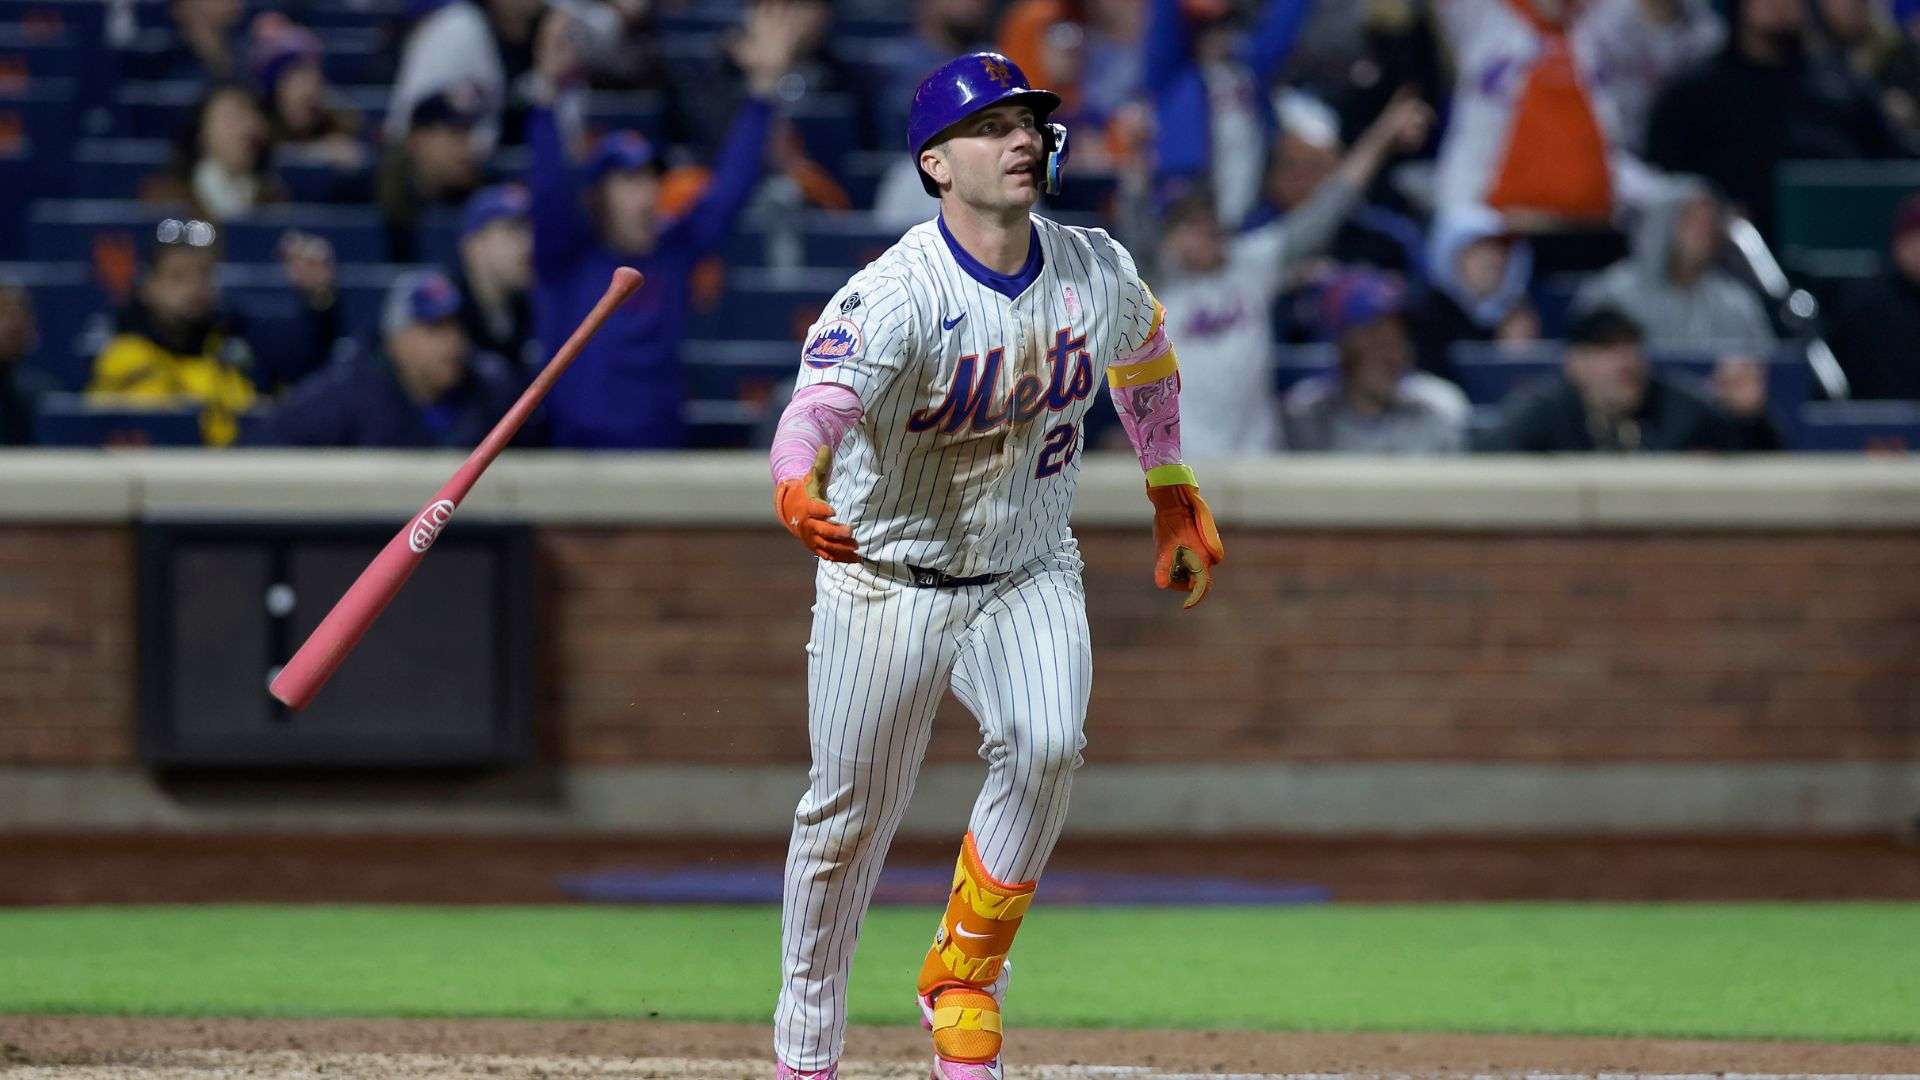 Pete Alonso #20 of the New York Mets